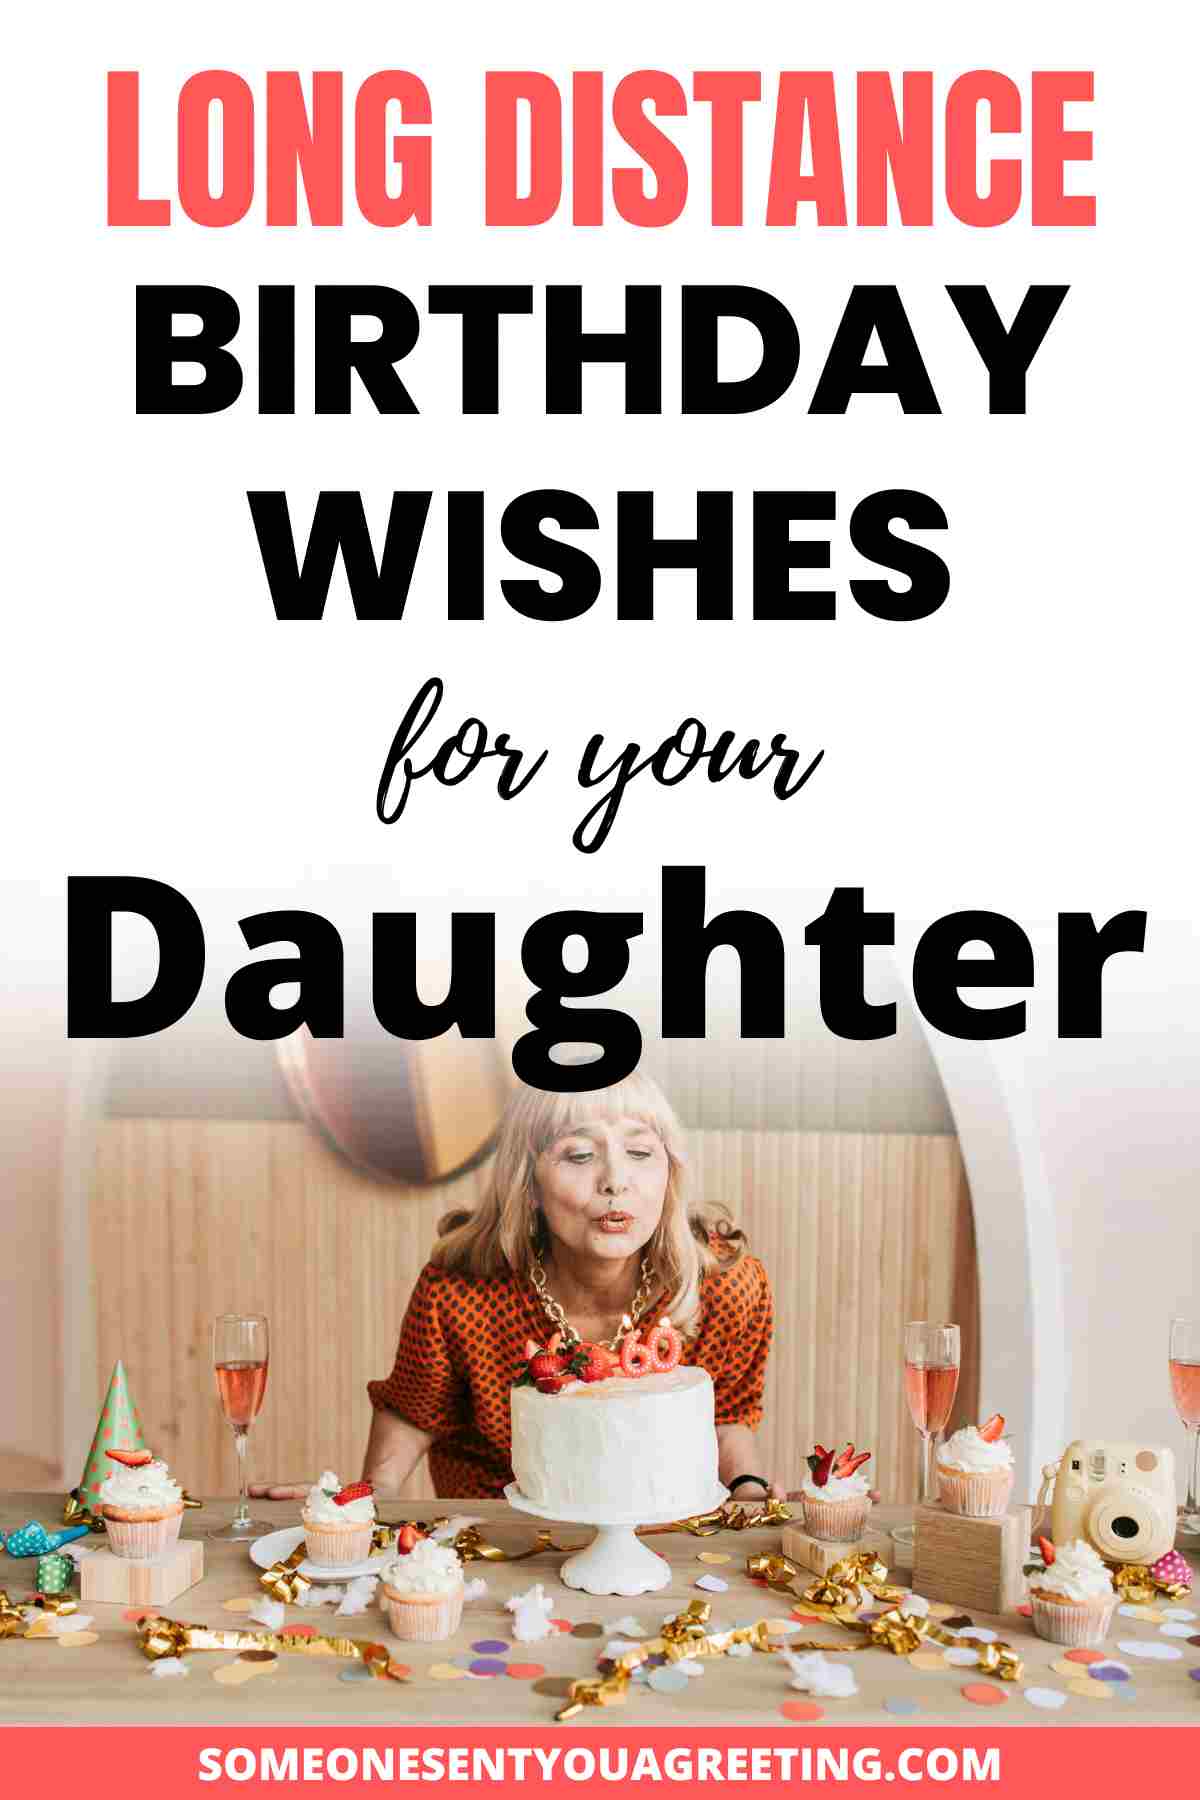 long distance birthday wishes for daughter